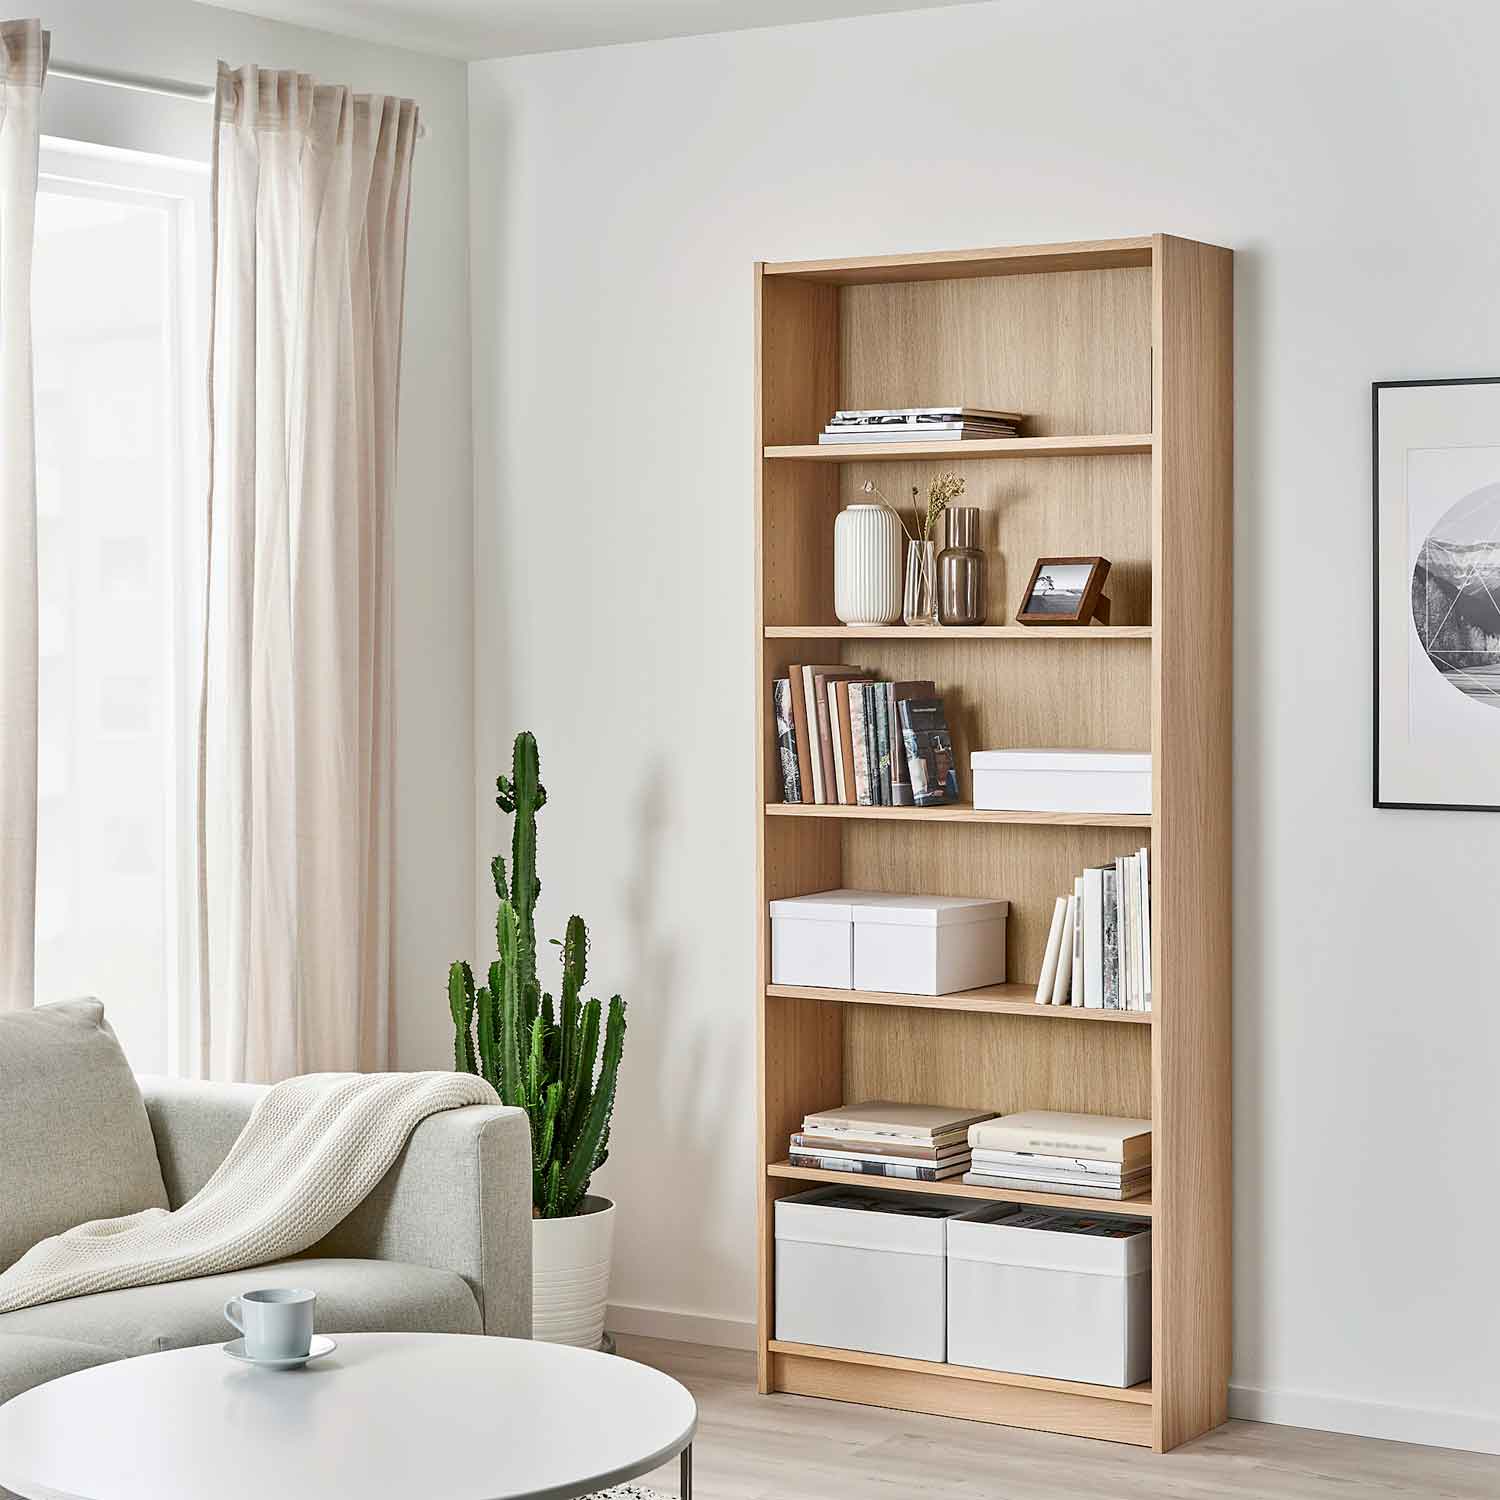 Furniture Source Philippines, Storage Boxes For Billy Bookcase